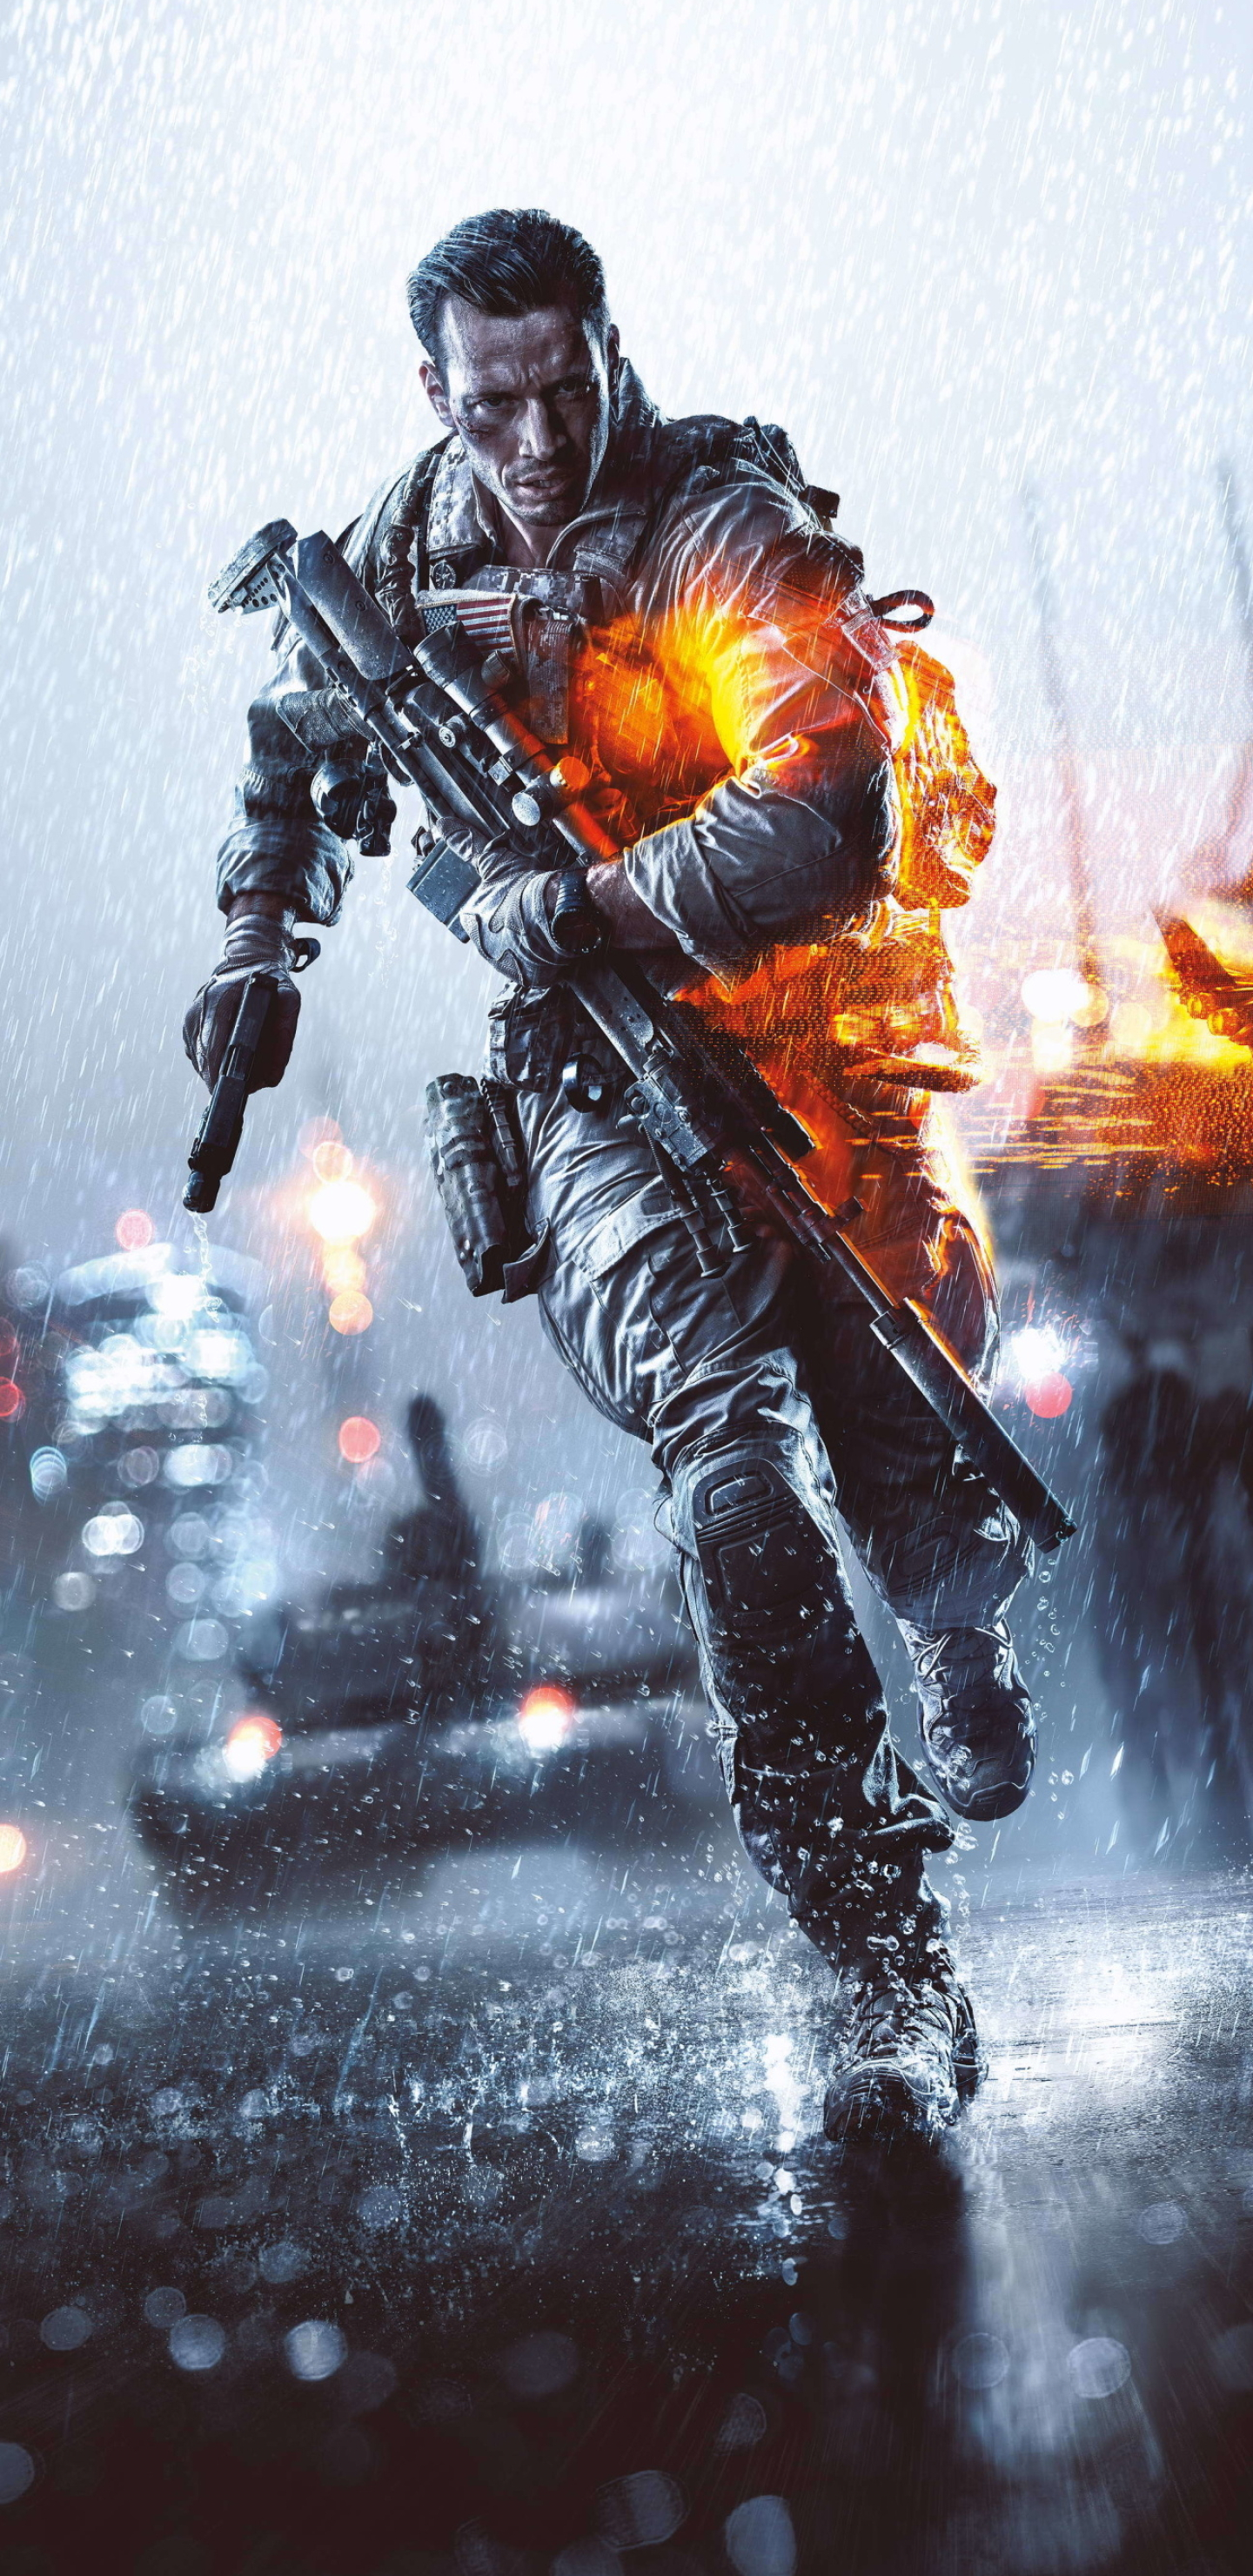 Shooter Game, Gaming, video game battlefield 4, battlefield 4 game, 1440x2960 HD Handy